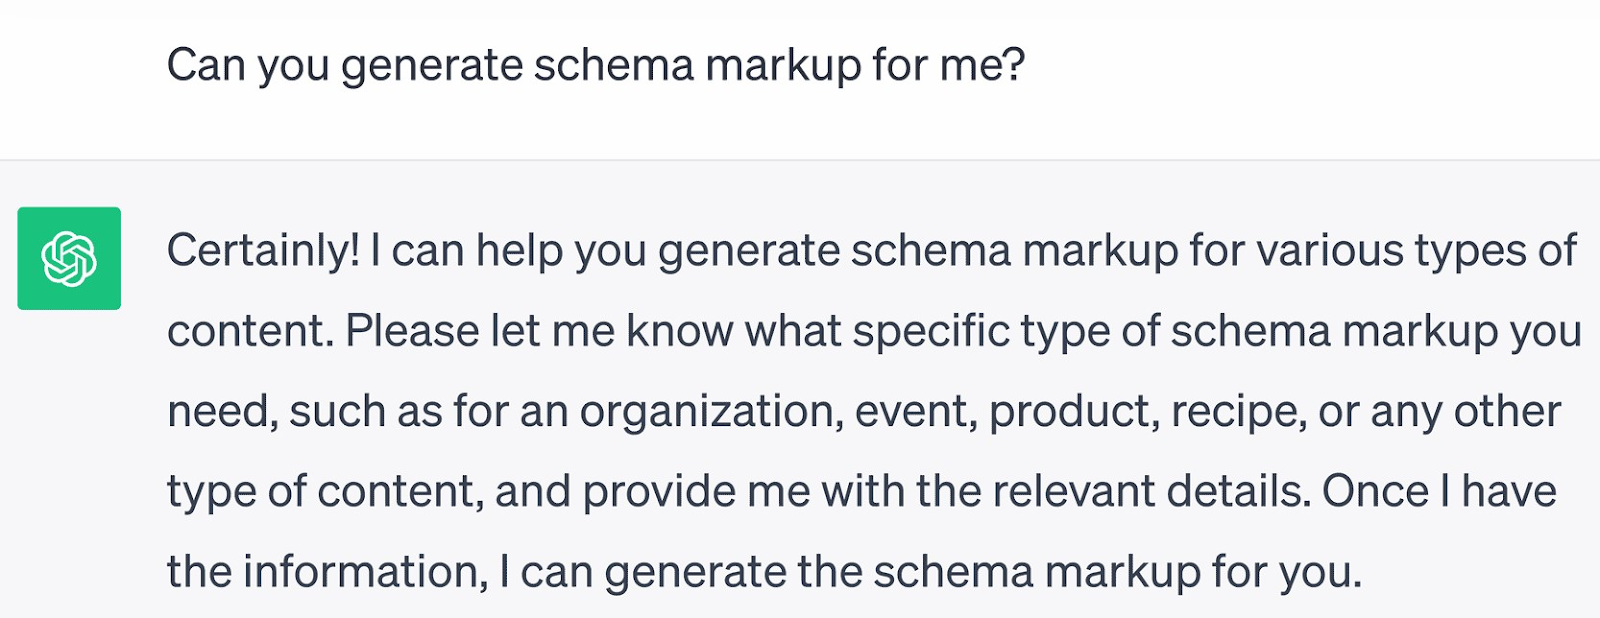 ChatGPT response to “Can you generate schema markup for me?” prompt